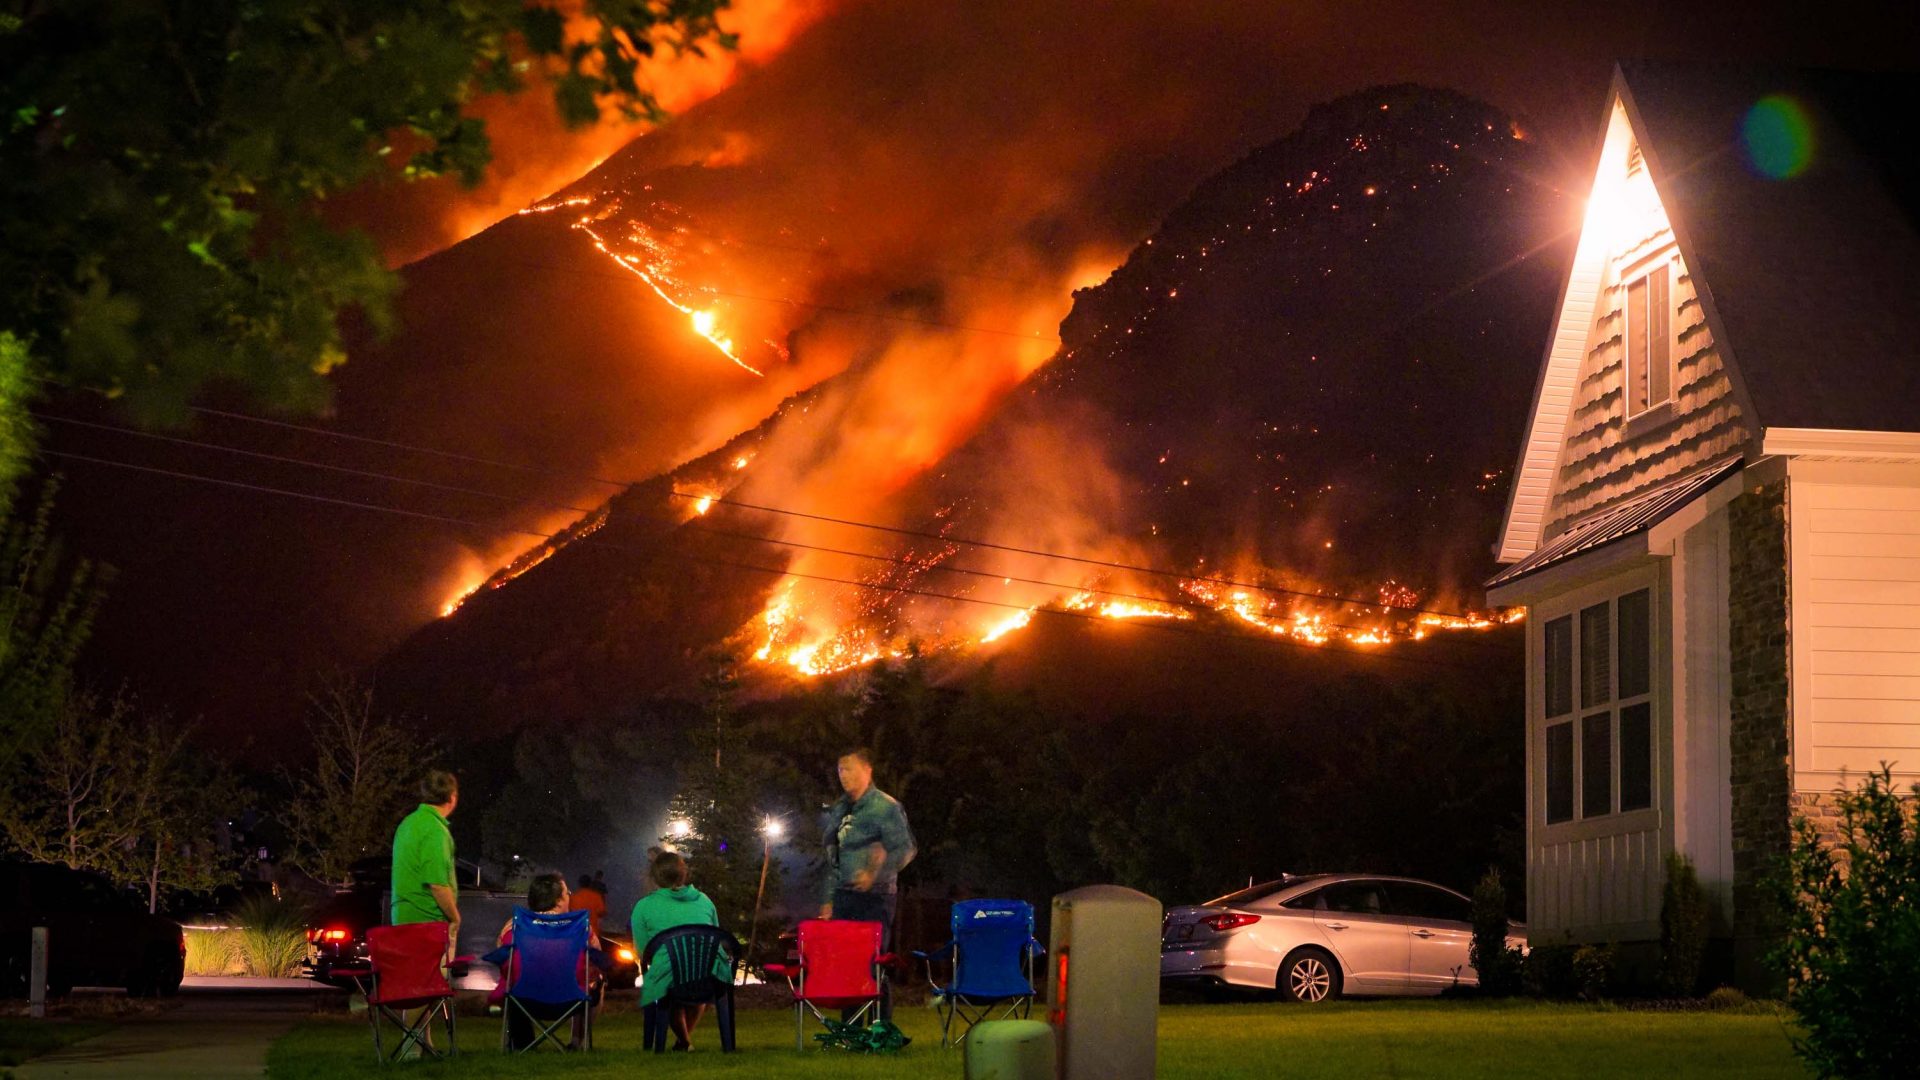 A group of people sit on chairs on the lawn of their home to watch nearby wildfires.